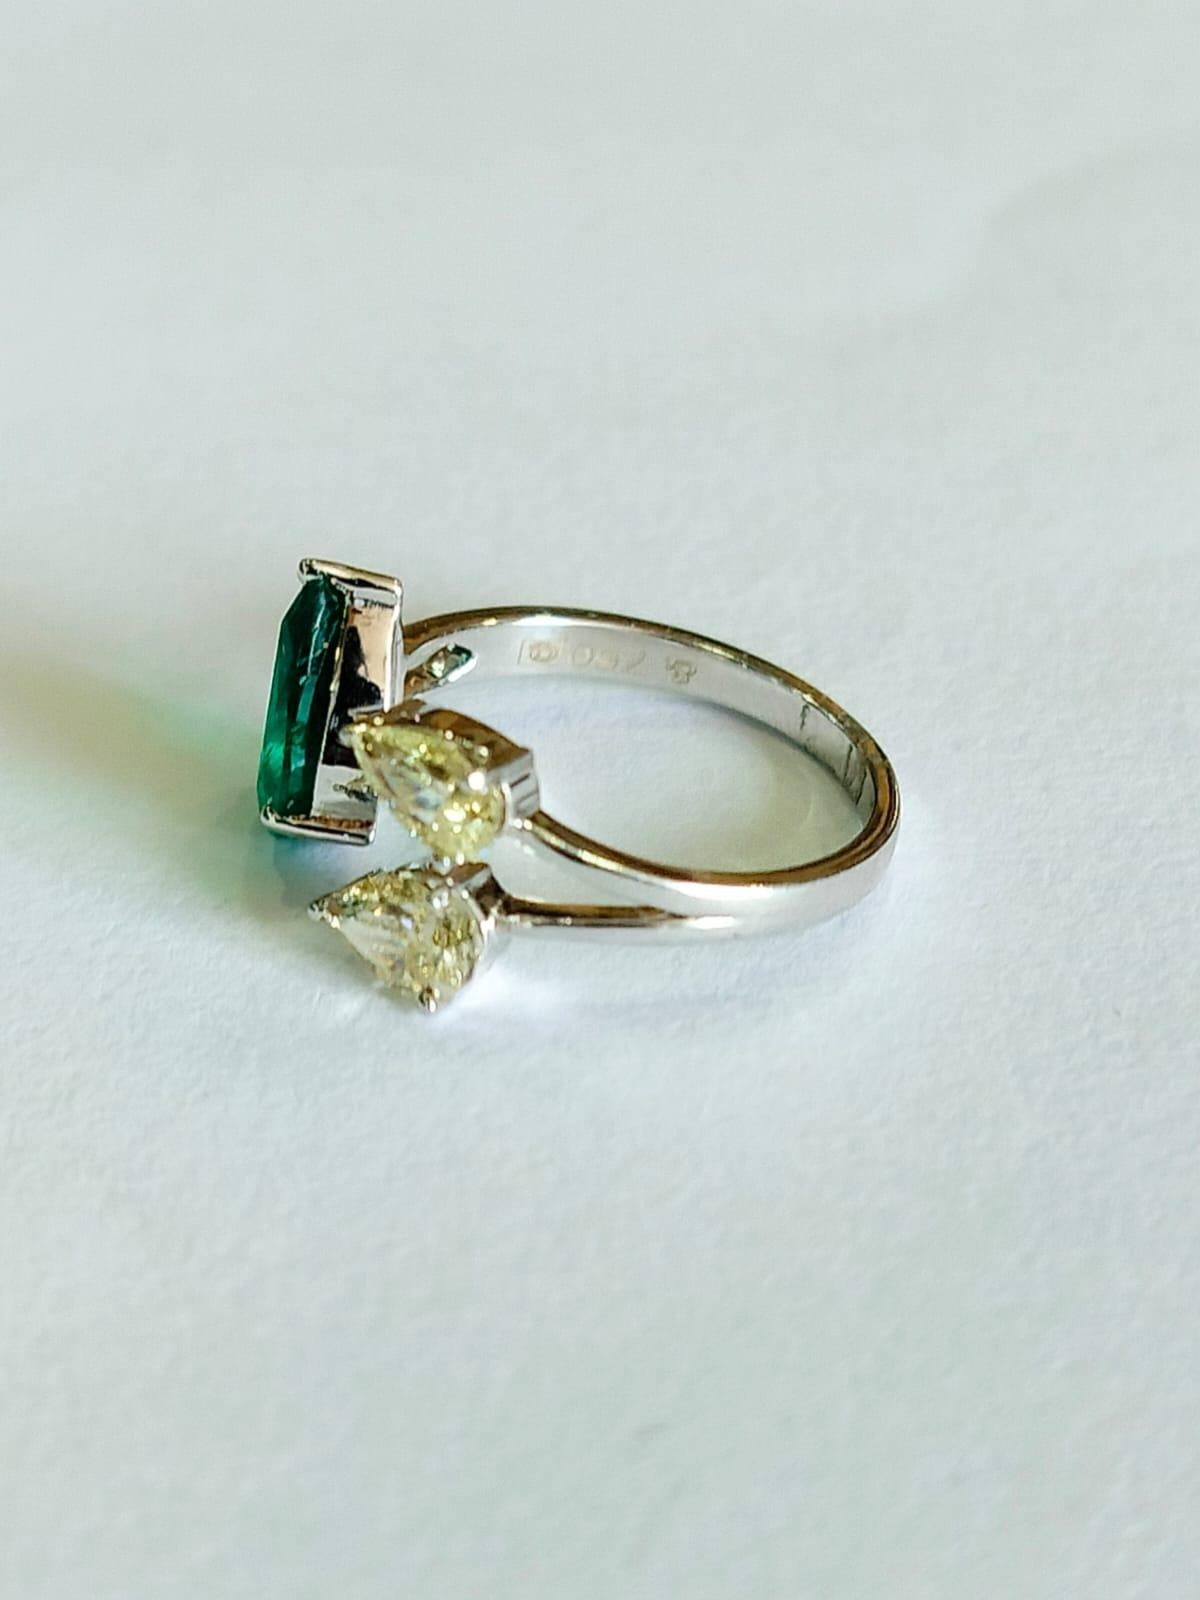 A very gorgeous and one of a kind, Emerald Engagement Ring set in 18K Gold & Diamonds. The weight of the Emerald is  1.46 carats. The Emerald is completely natural, without any treatment and is of Zambian origin. The Diamonds weight is 0.87 carats.